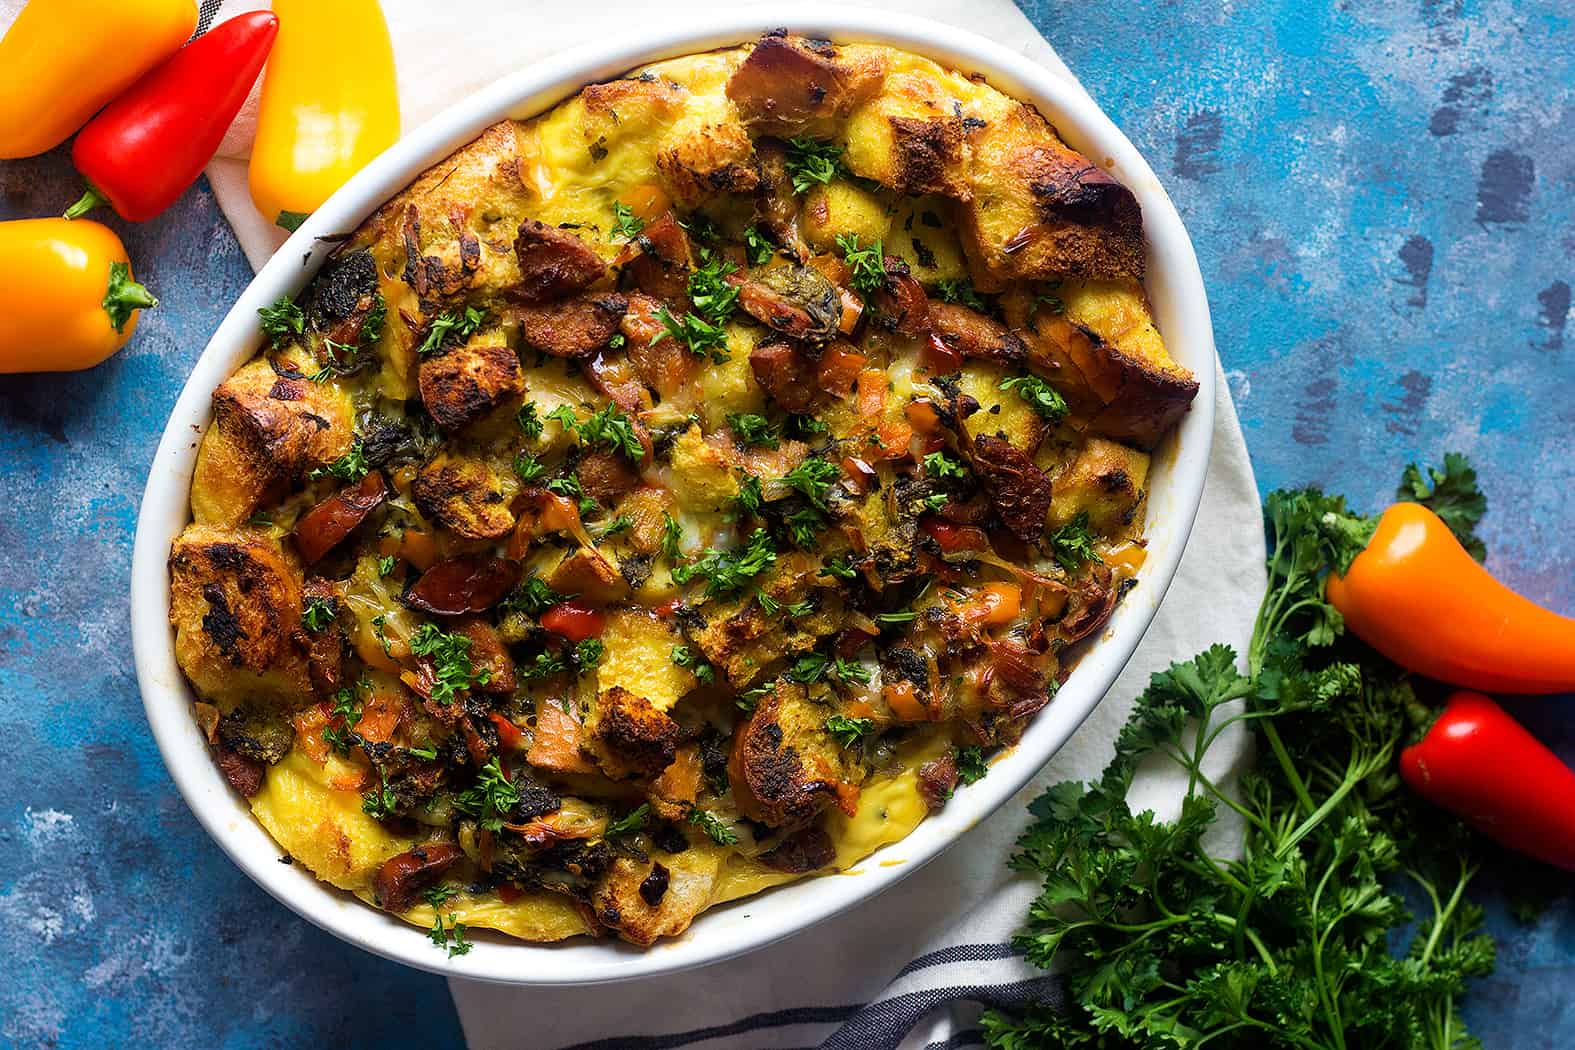 Savory bread pudding is great for brunch. This sausage bread pudding with spinach and asparagus is full of delicious ingredients and very easy to prepare.